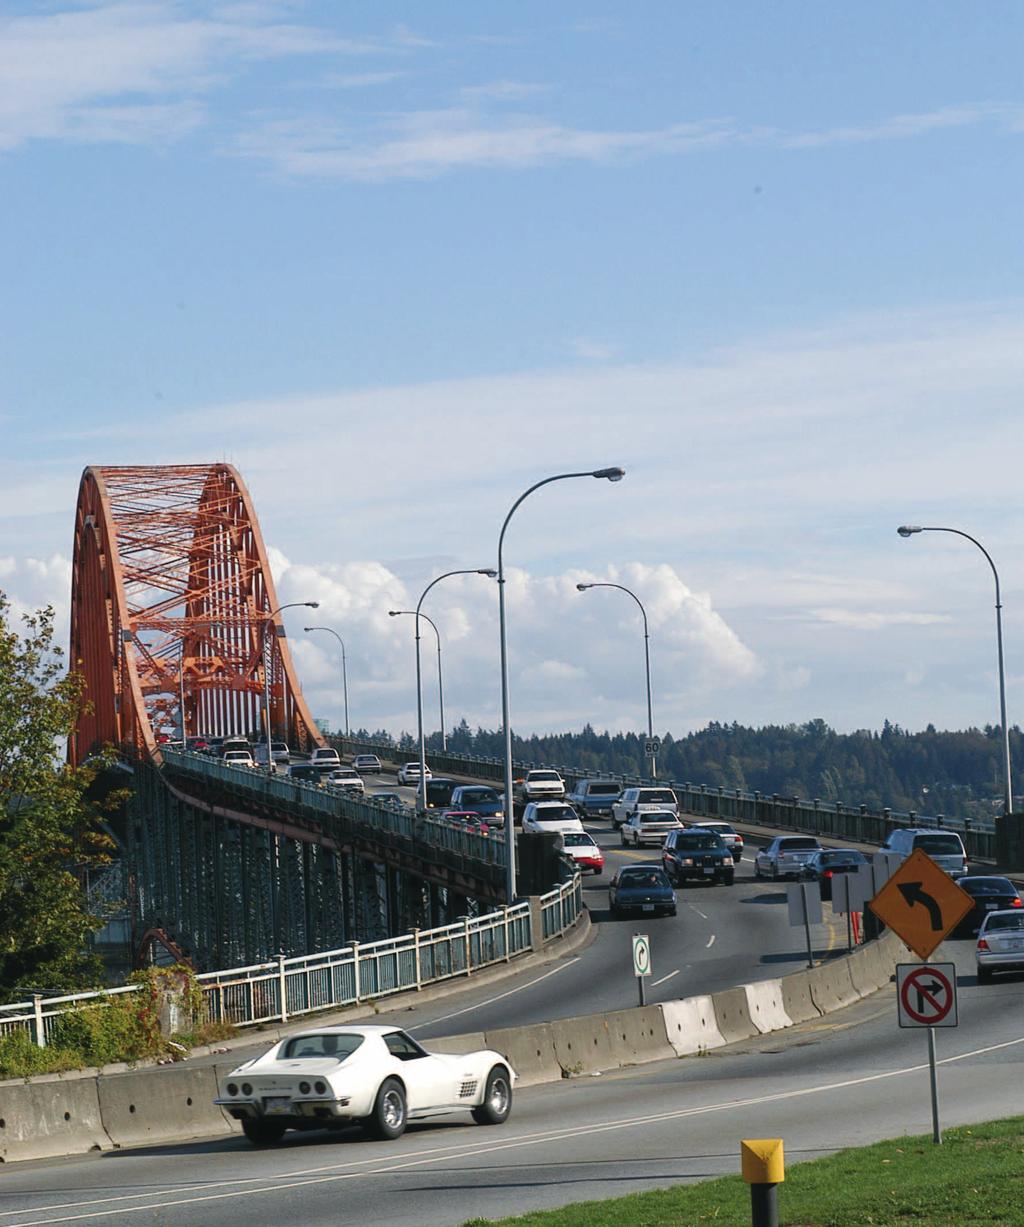 A New Bridge Concept Project Definition Phase Objectives: Determine location for new bridge Develop functional connections to the Major Road Network and South Fraser Perimeter Road Determine bridge